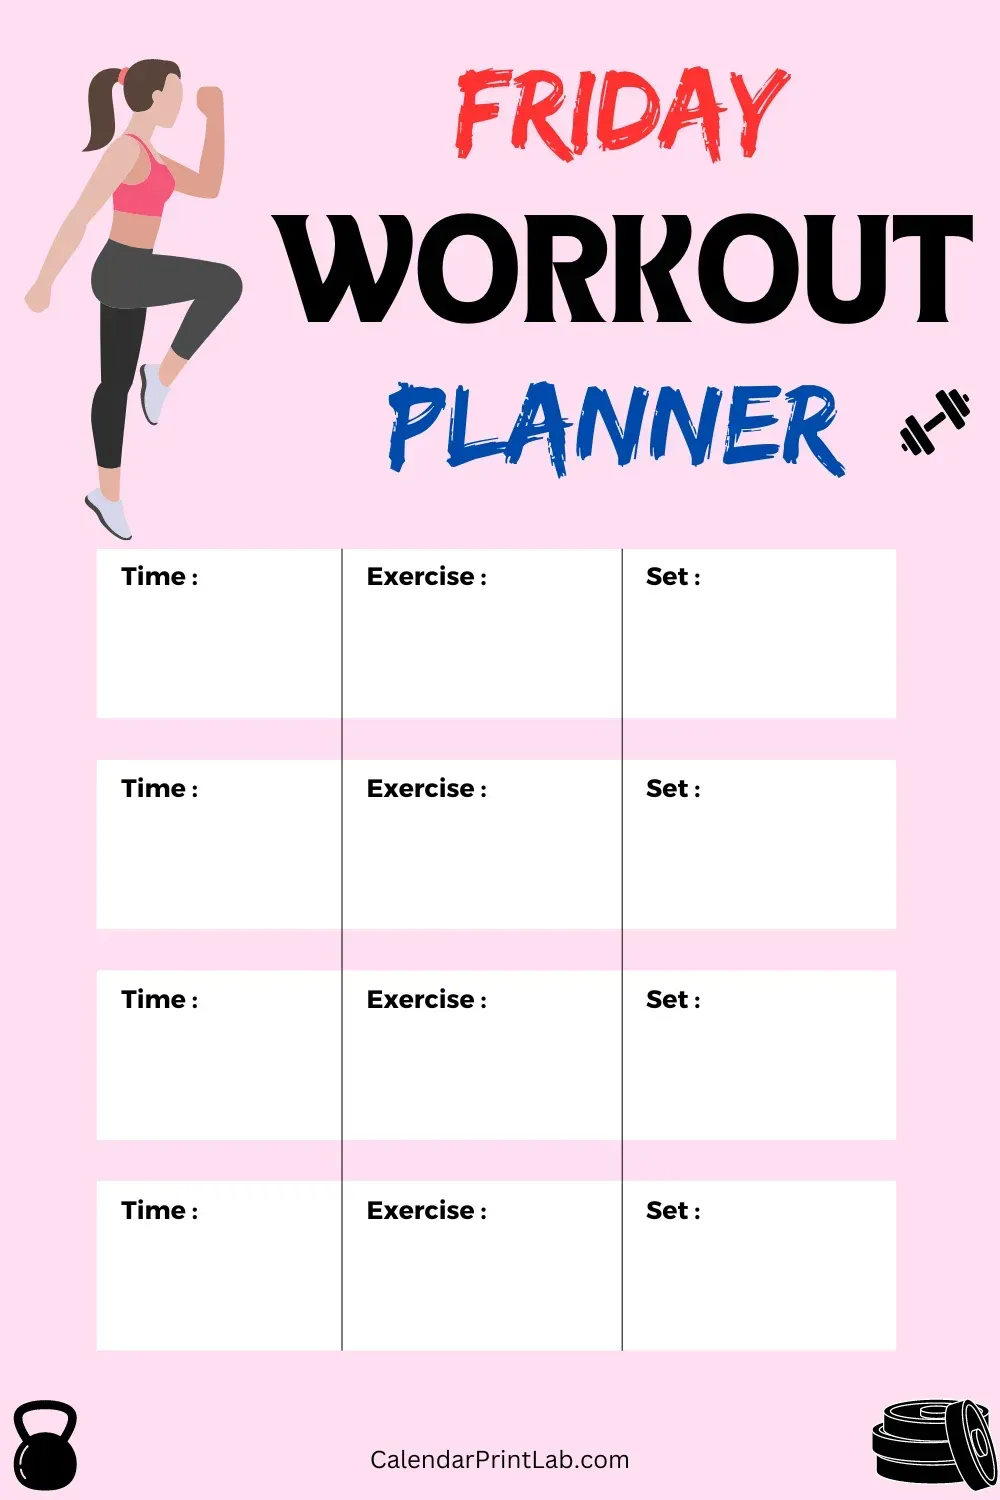 Friday Workout Planner for Women